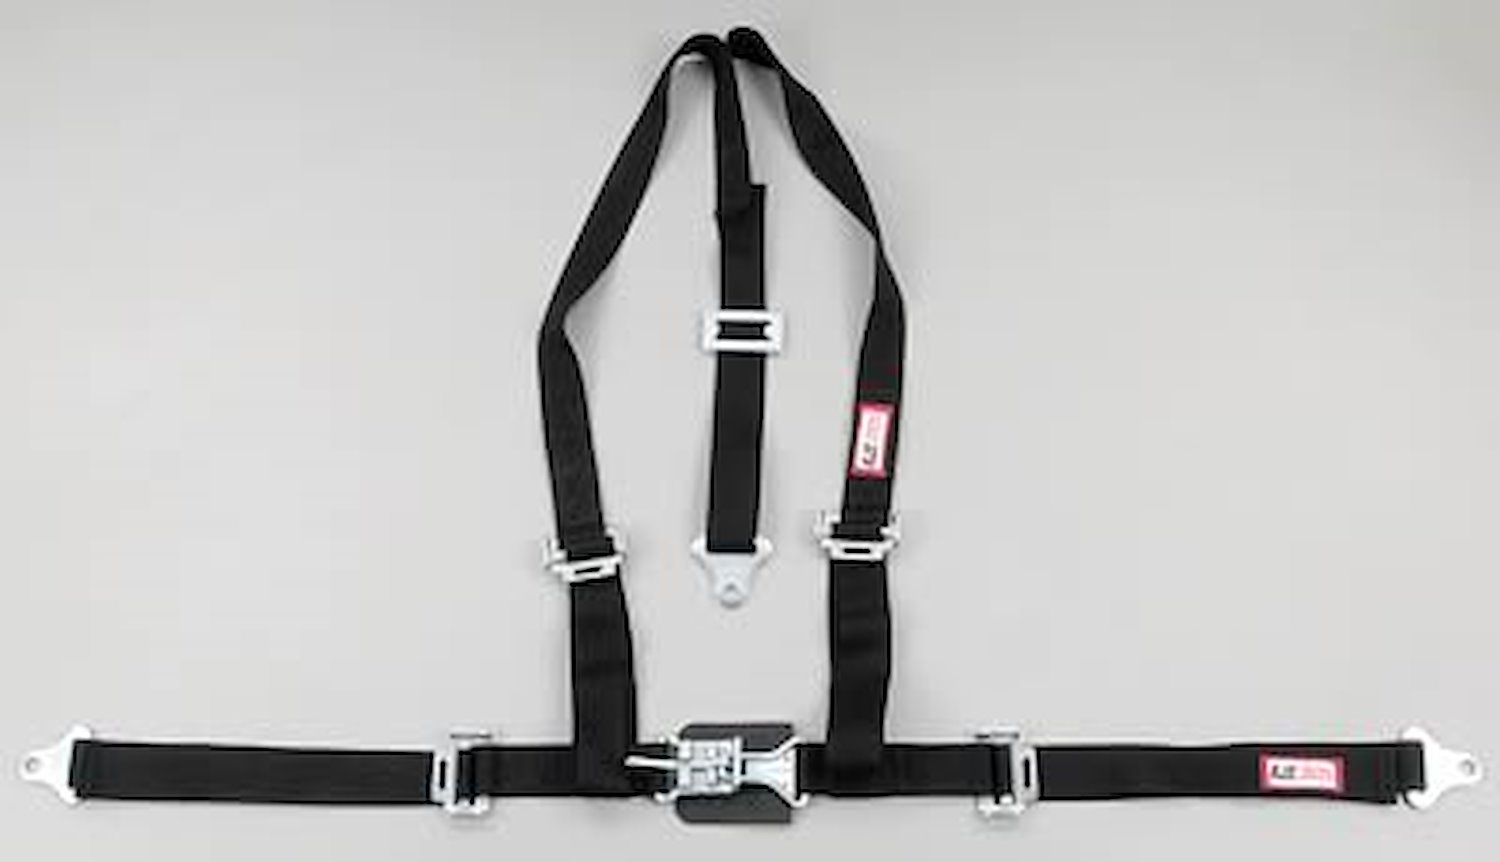 NON-SFI L&L HARNESS 3 PULL DOWN Lap Belt w/adjuster 2 S.H. Y FLOOR Mount ALL WRAP ENDS GRAY